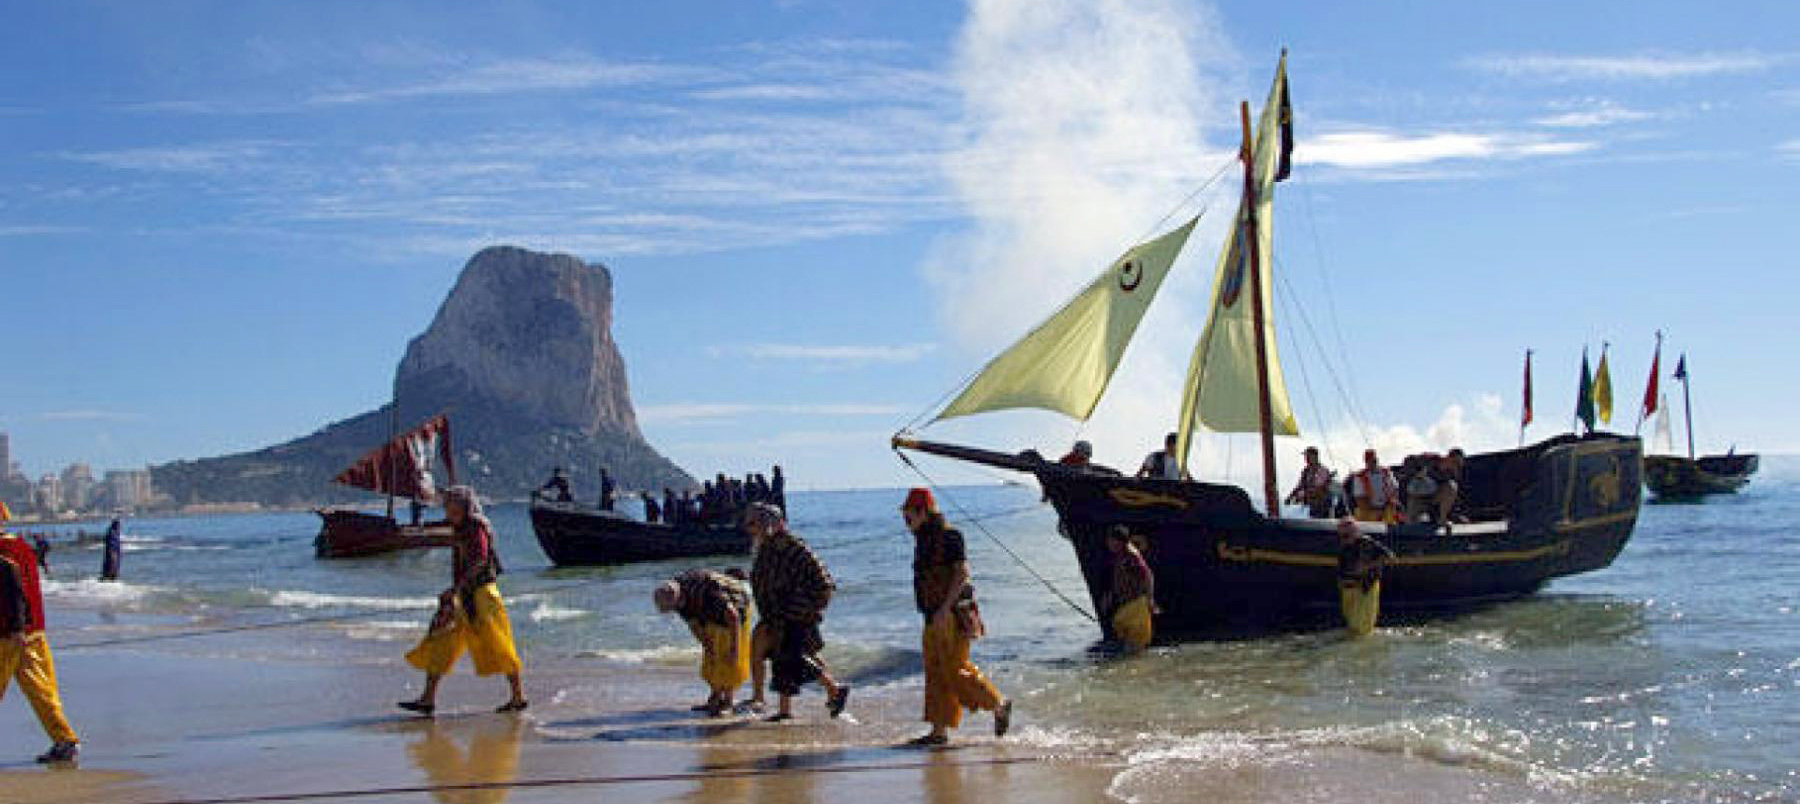 Calpe proudly reenacts the history confruntation between Moors and Christians as actors come ashore at Calpe beach, complete with boat!